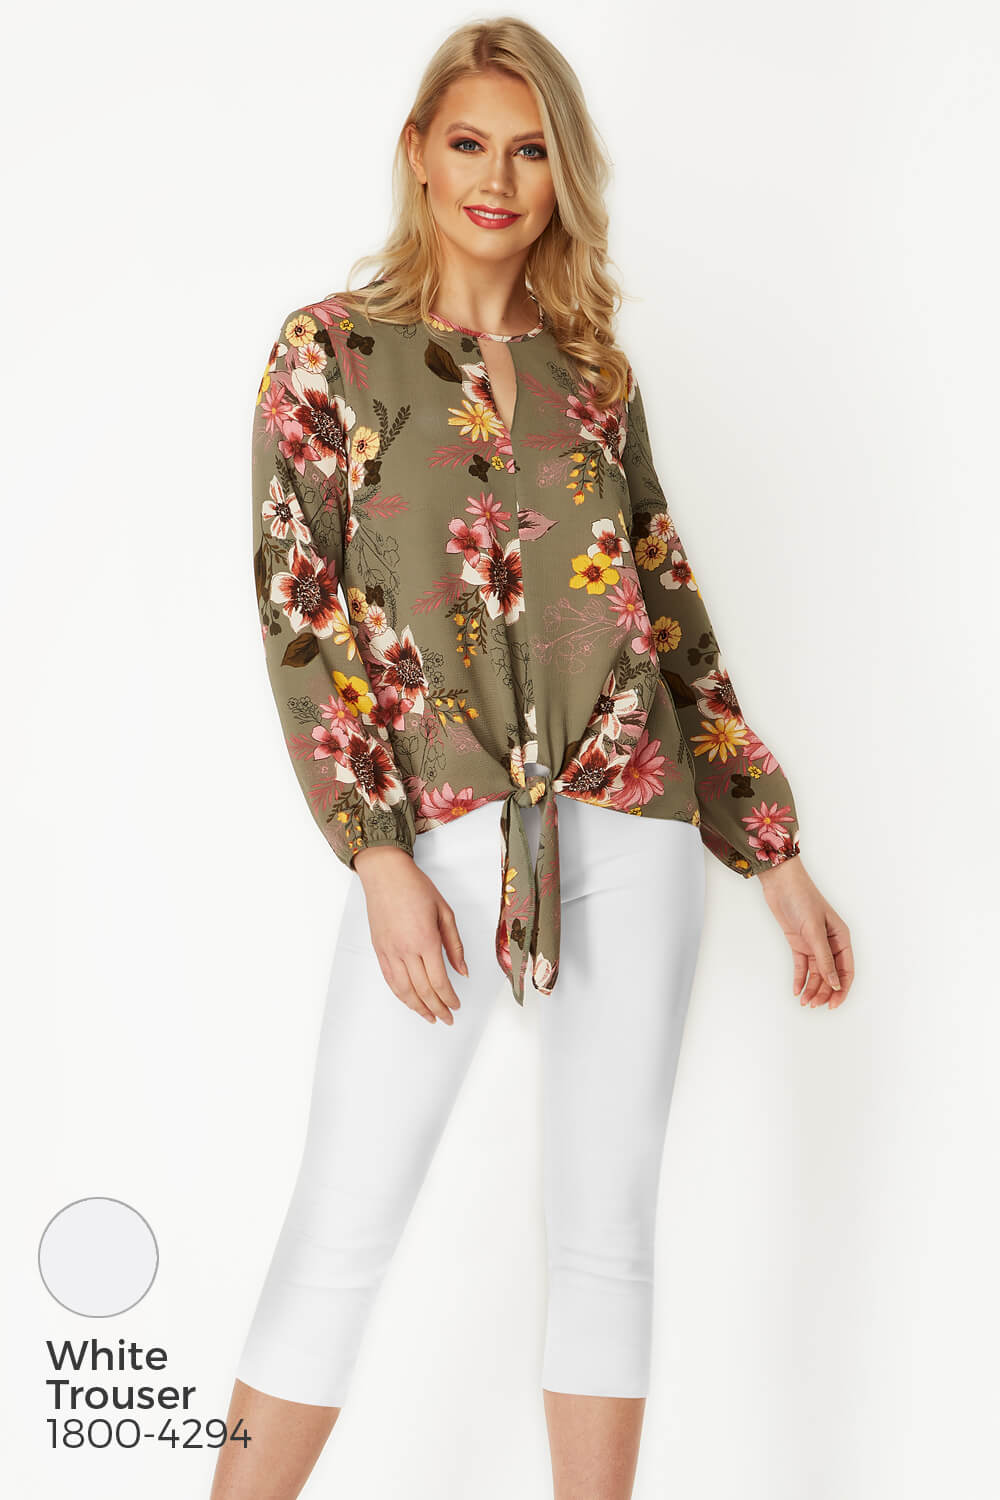 KHAKI Floral Tie Front Top, Image 6 of 8